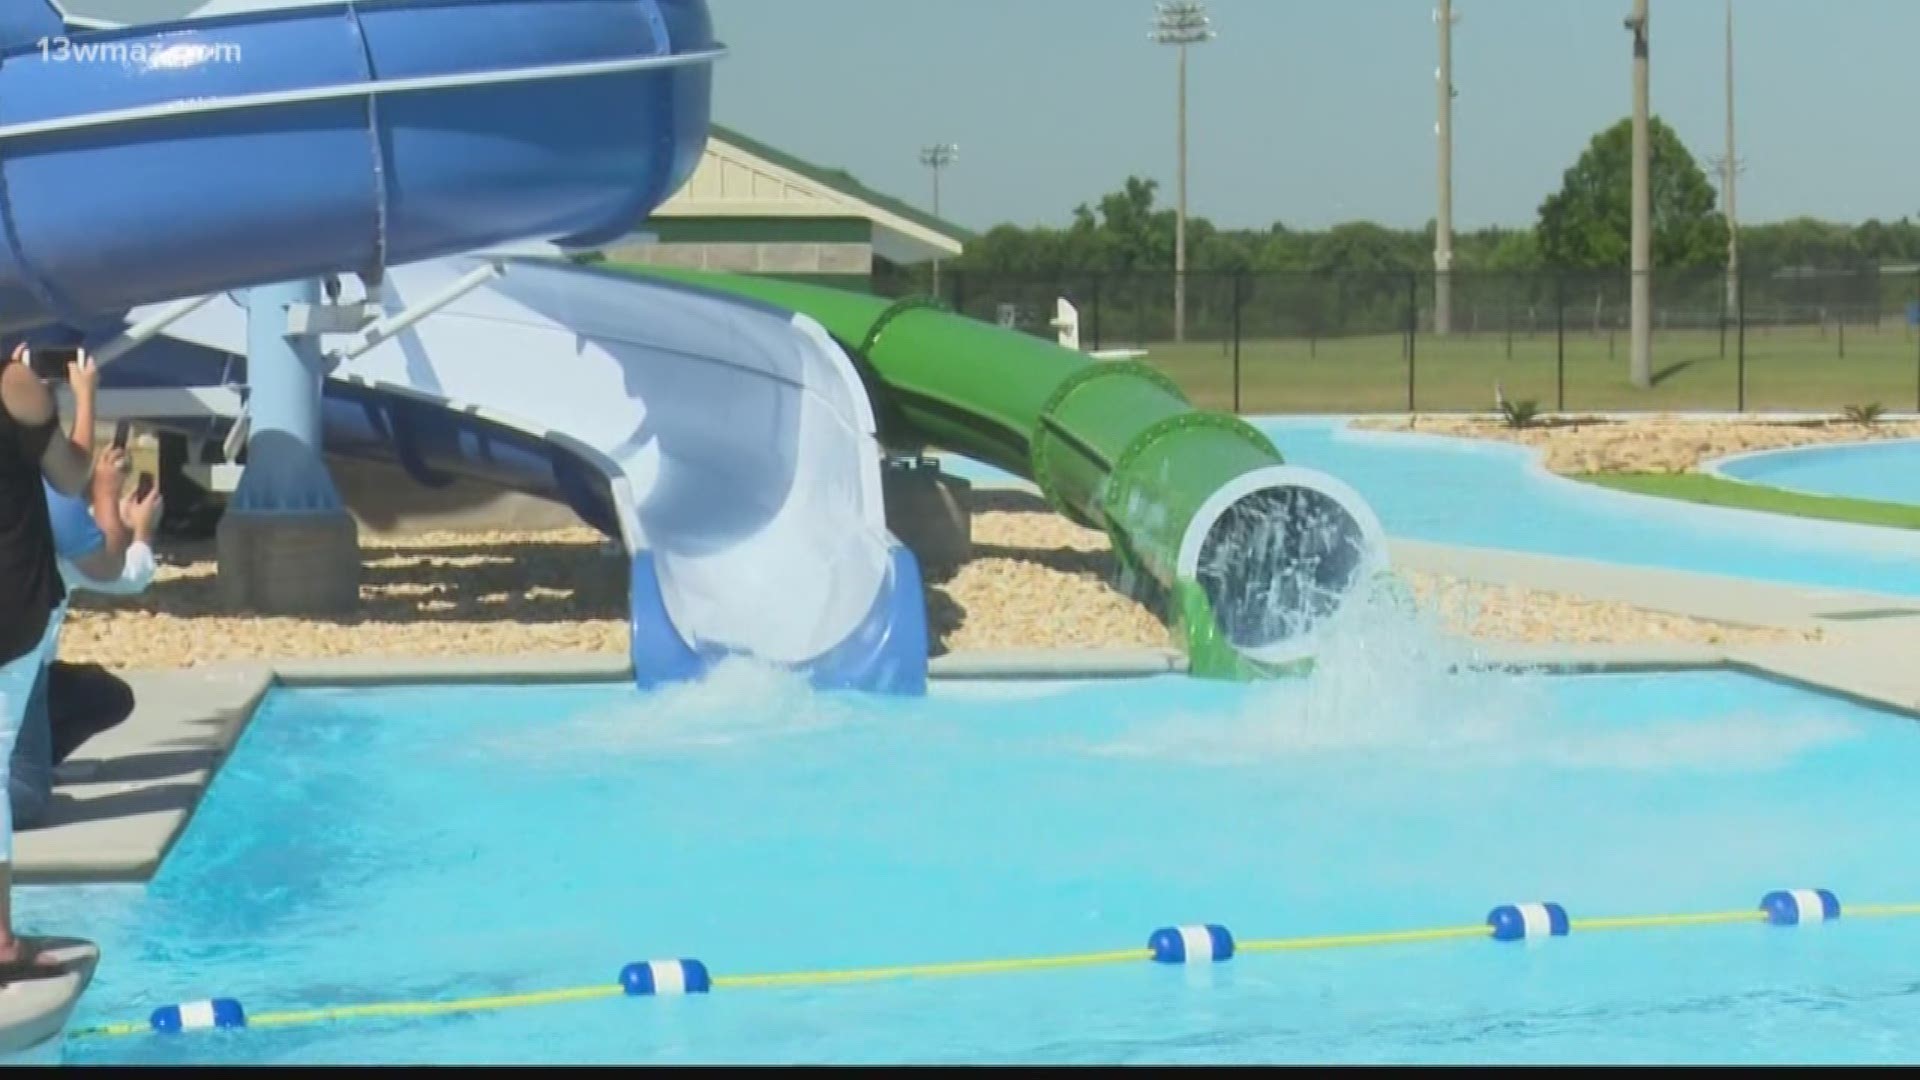 The city of Dublin has launched a shuttle service to take students to the new Southern Pines Water Park, but some people who live out in Laurens County aren't happy about it.